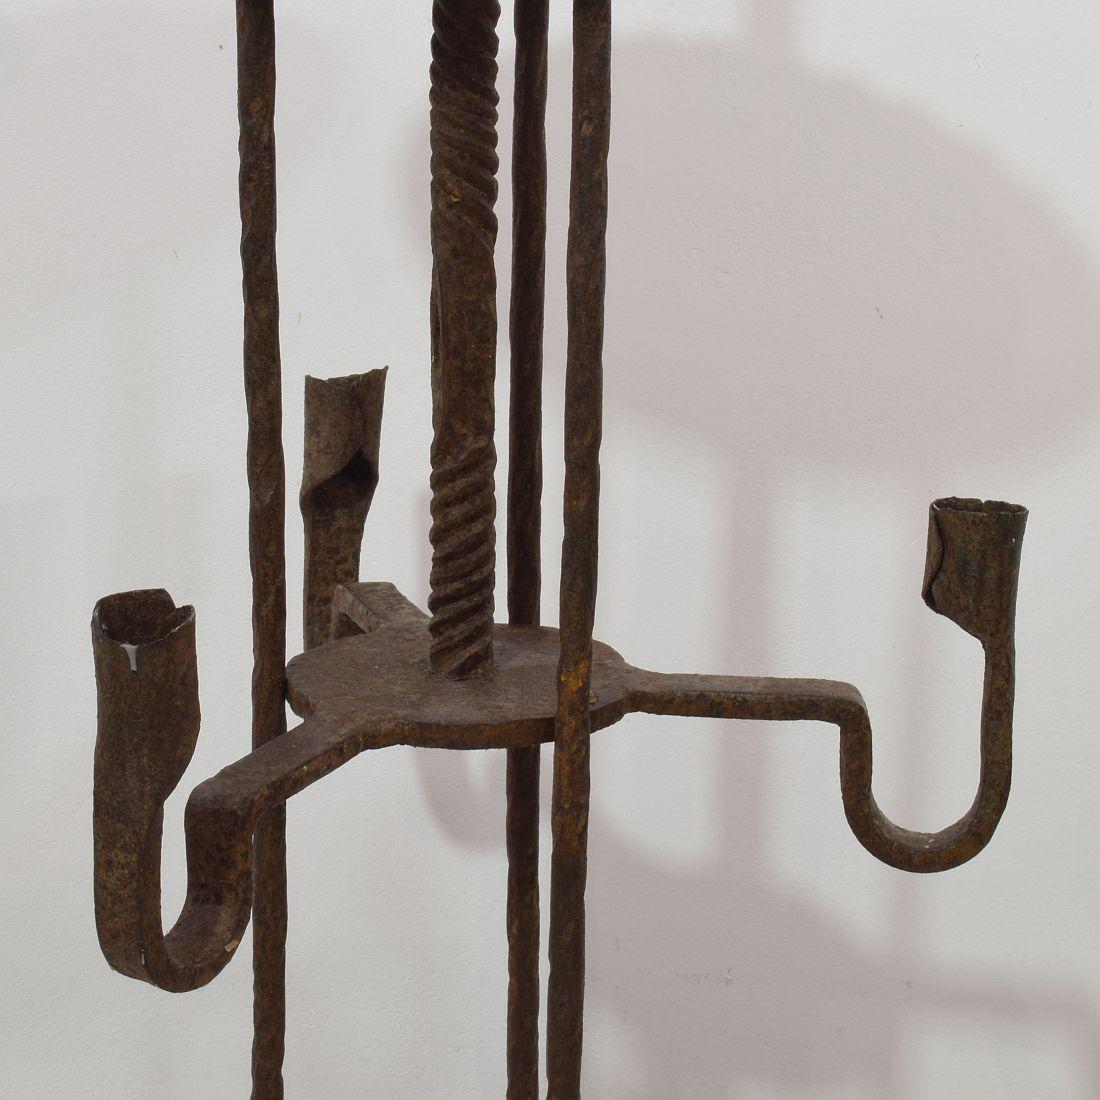 17th-18th Century Spanish Hand Forged Iron Candleholder 11